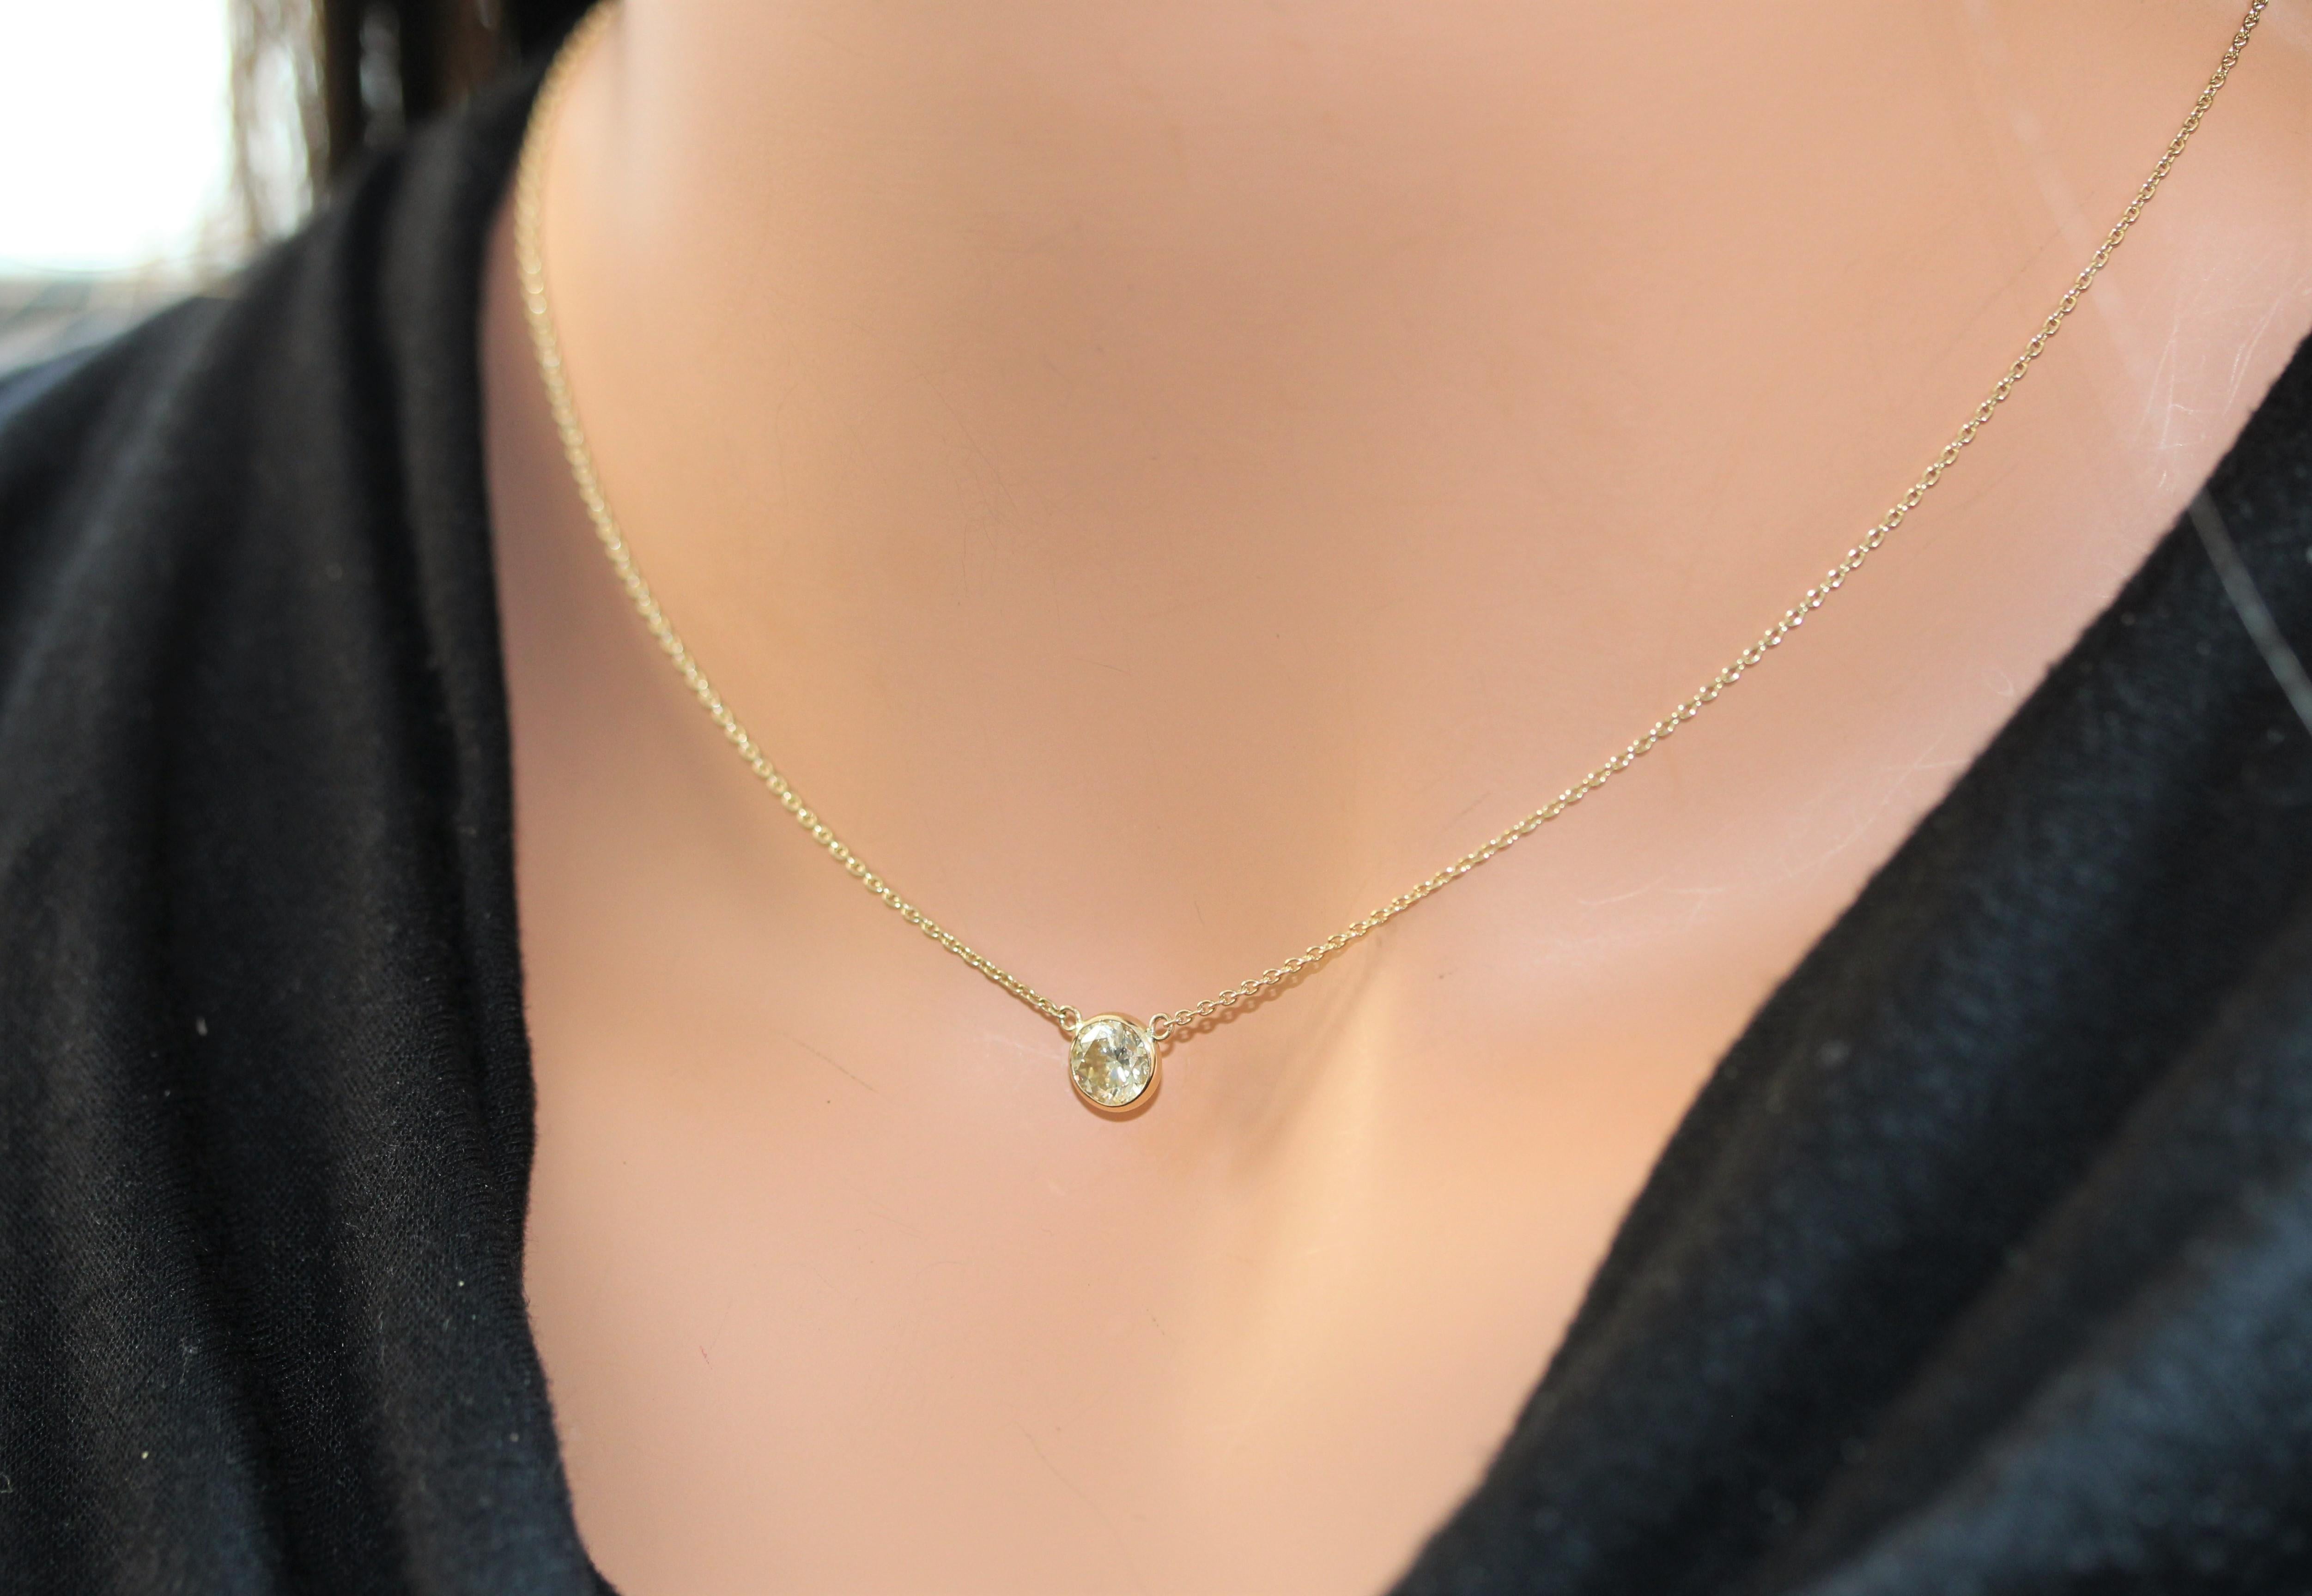 Round Cut 1.06 Carat Round Diamond Handmade Solitaire Necklace In 14k Yellow Gold For Sale